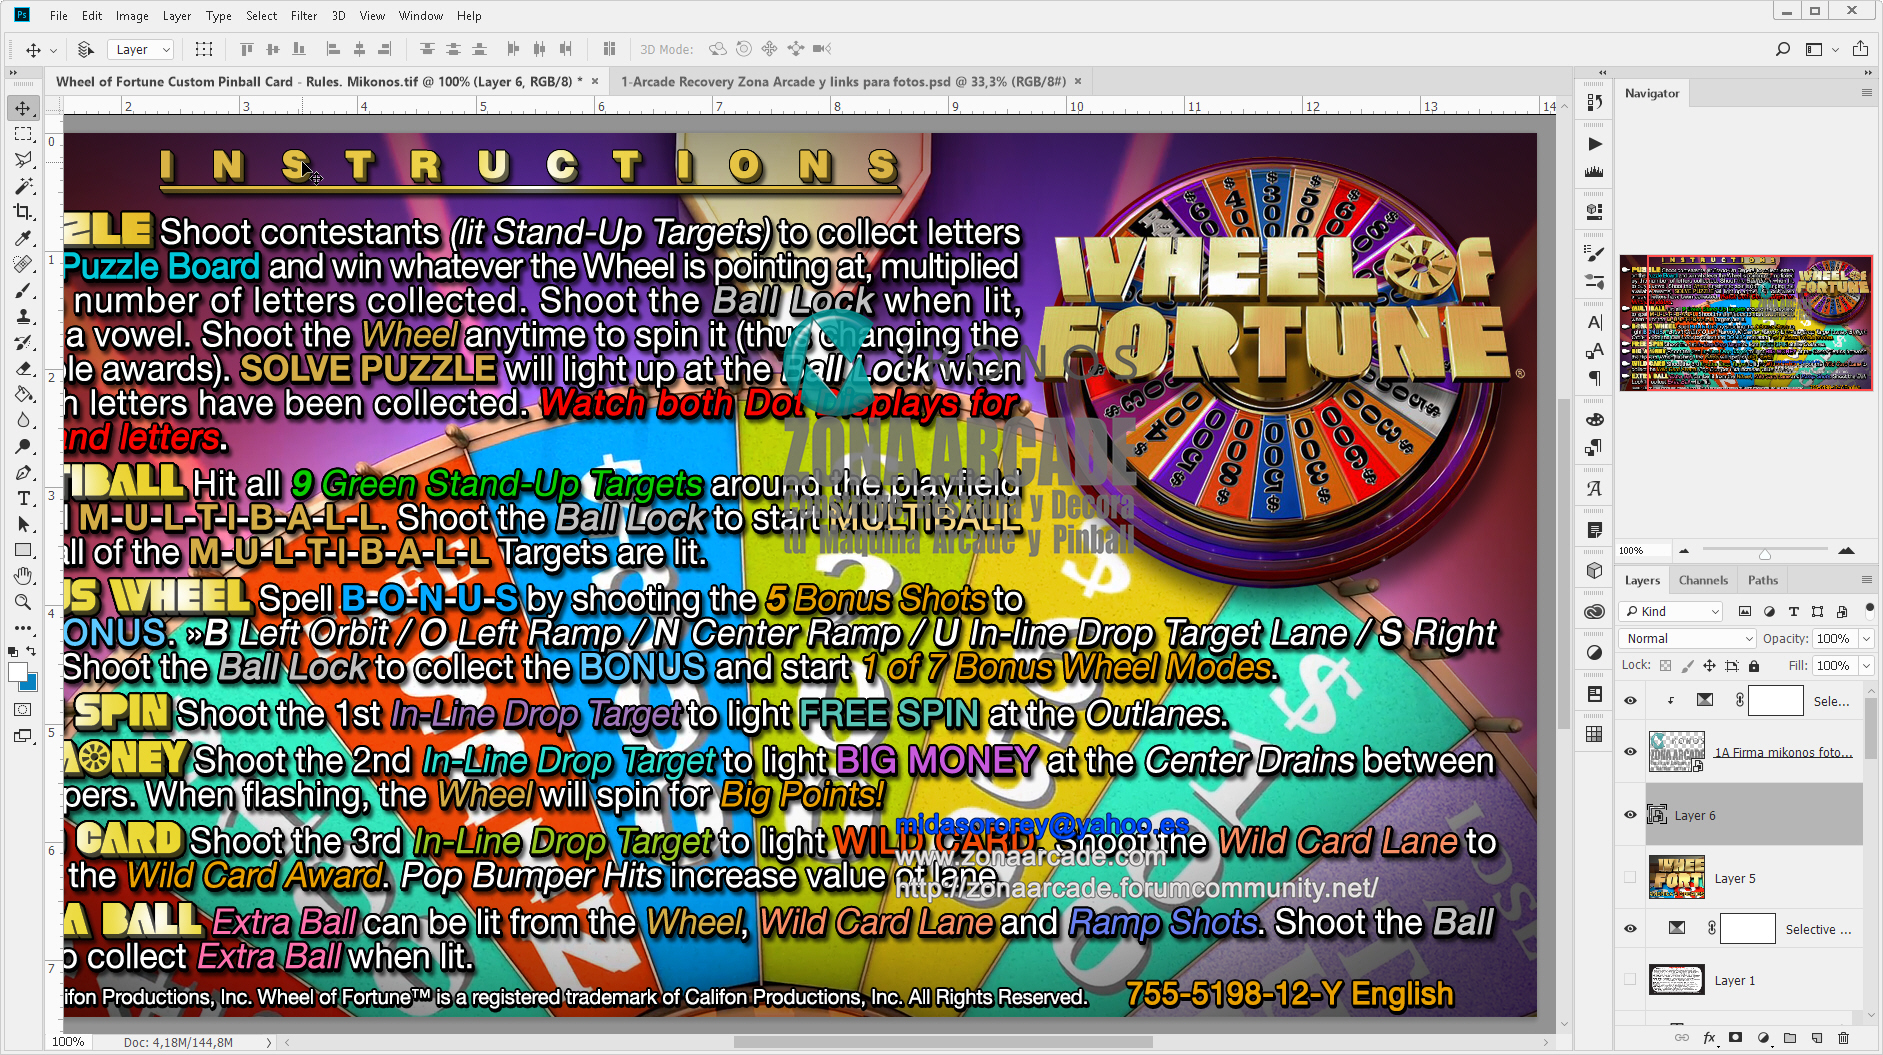 Wheel-of-Fortune-Pinball-Card-Customized-Rules2-Mikonos2